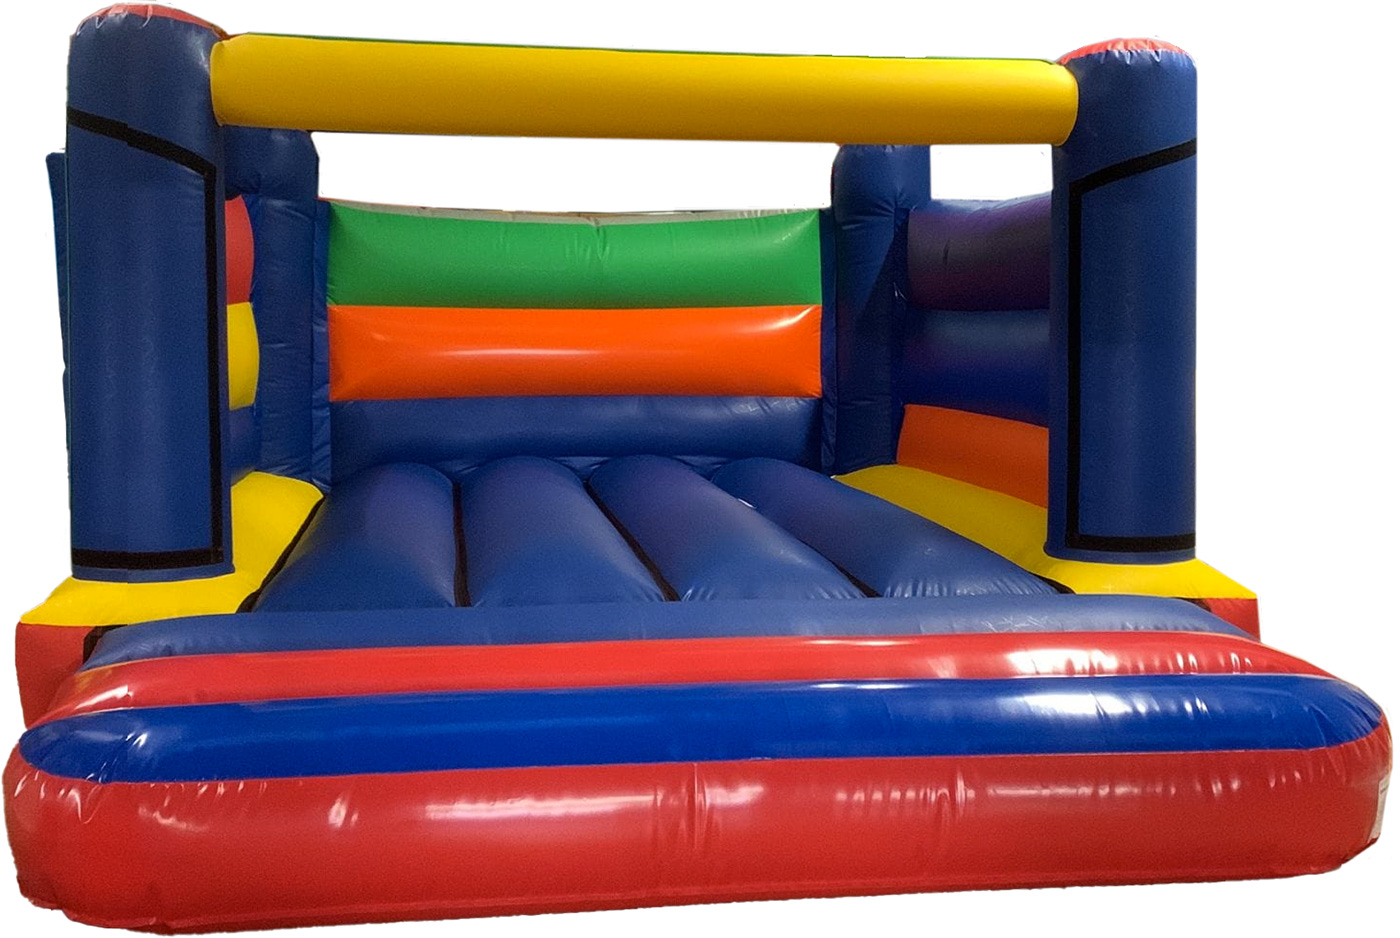 Bouncy Castle Sales - BC703 - Bouncy Inflatable for sale